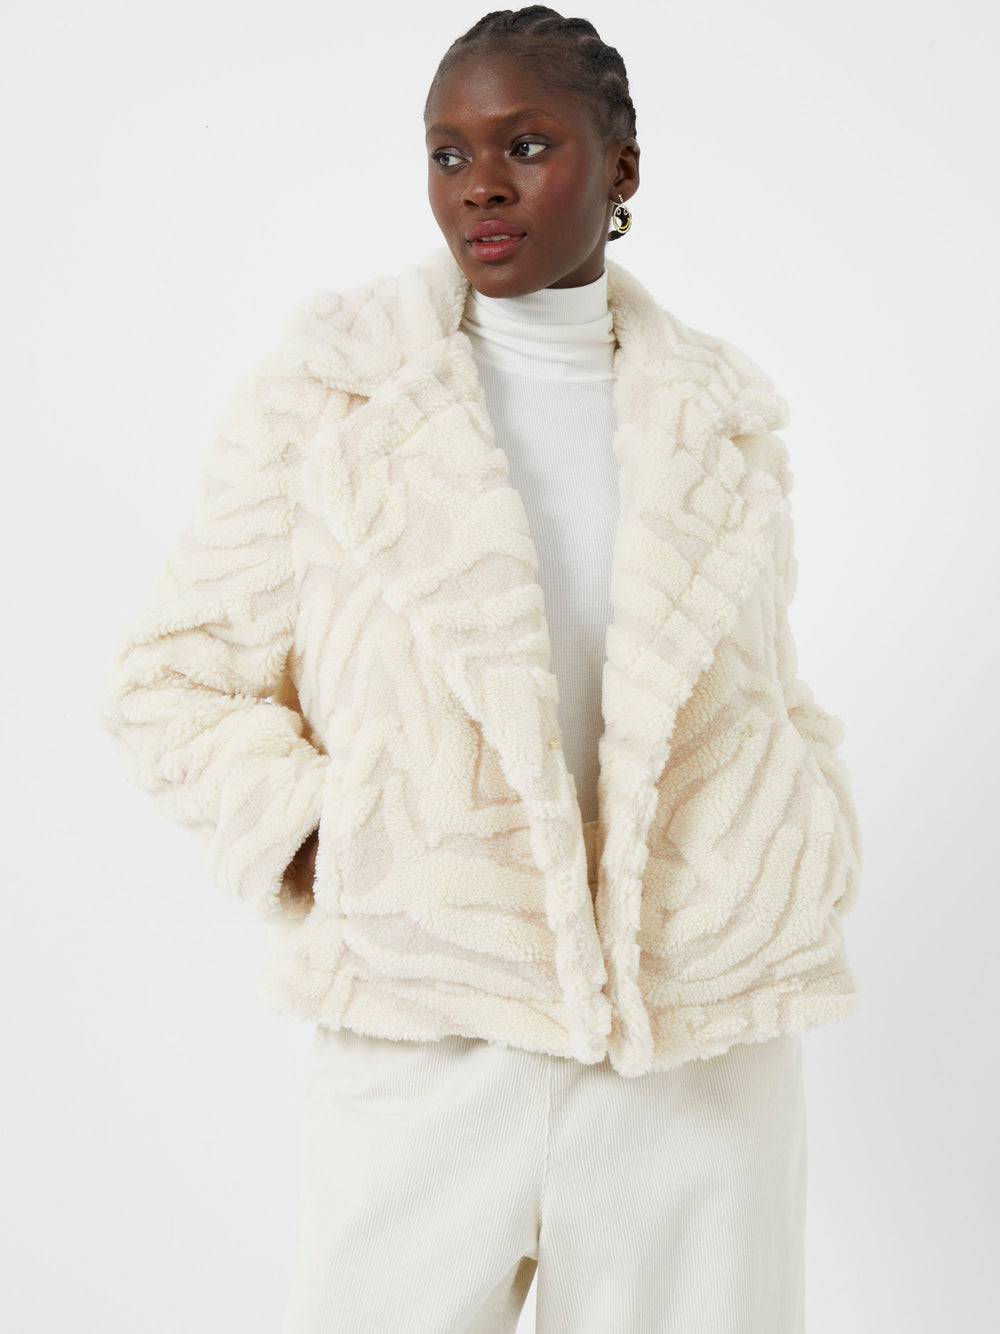 Bobby Borg Cropped Jacket Classic Cream | French Connection US